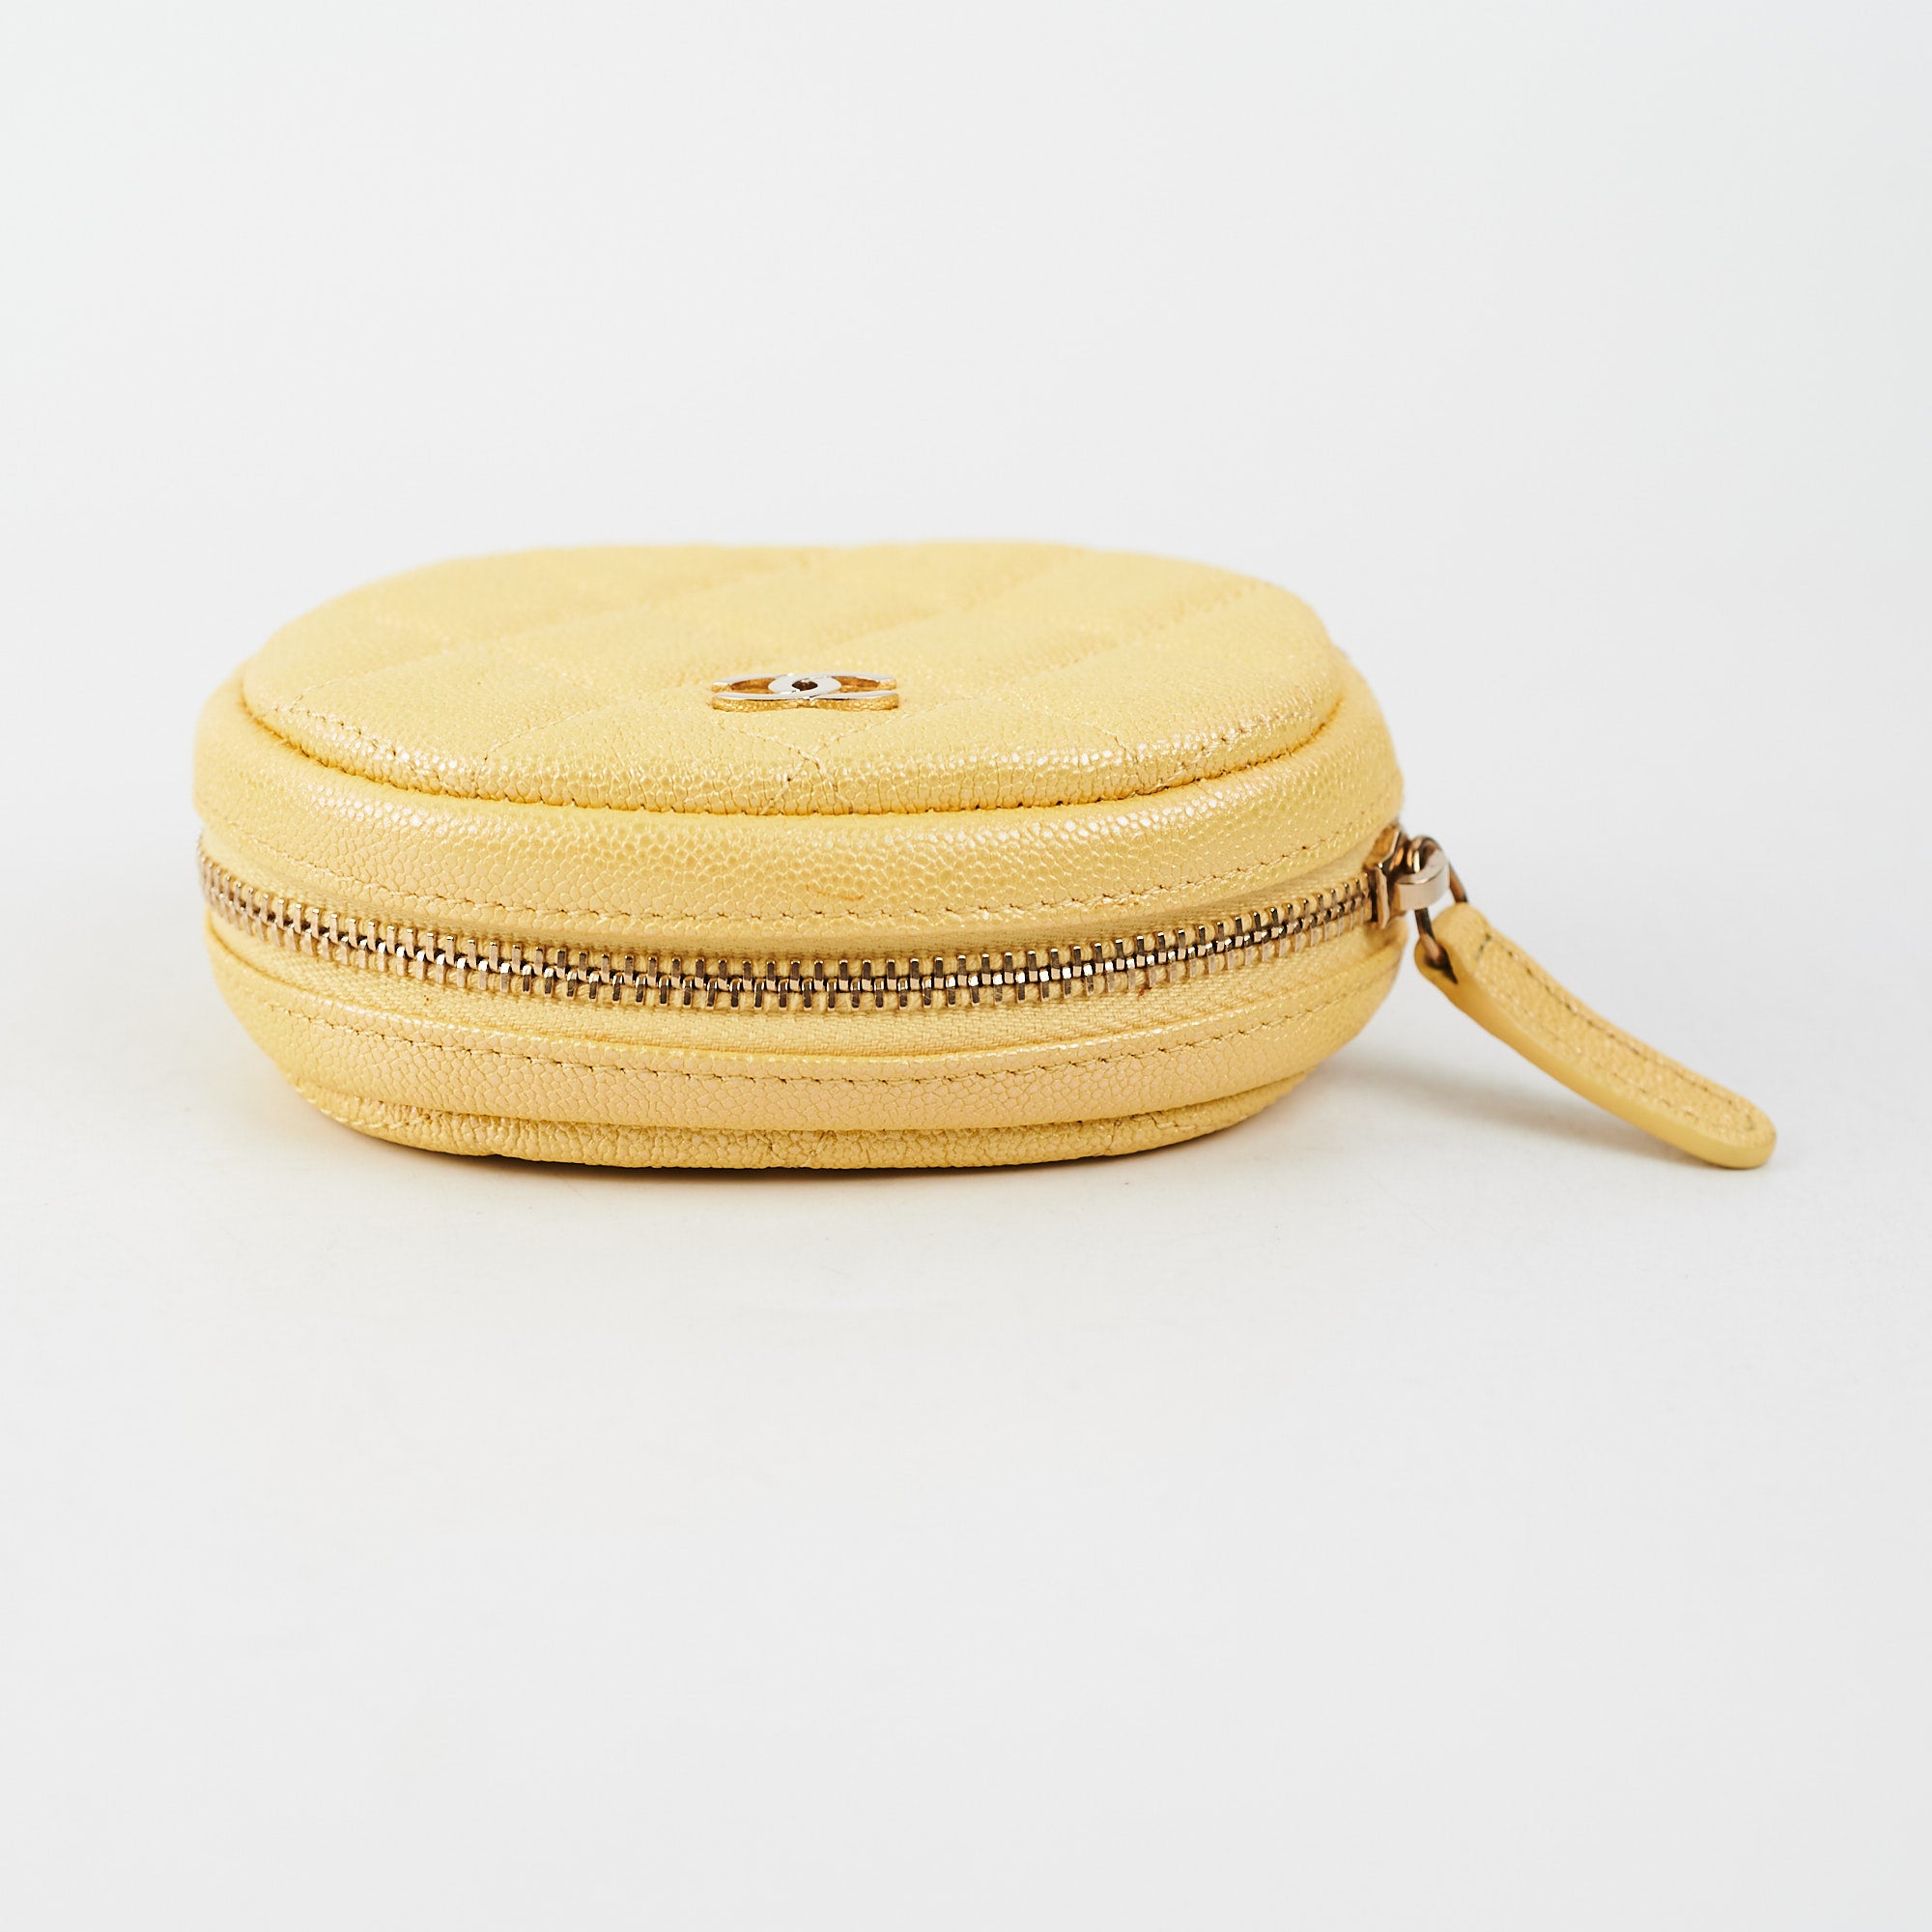 Chanel Classic Round Coin Purse, Chanel Coin Pouch